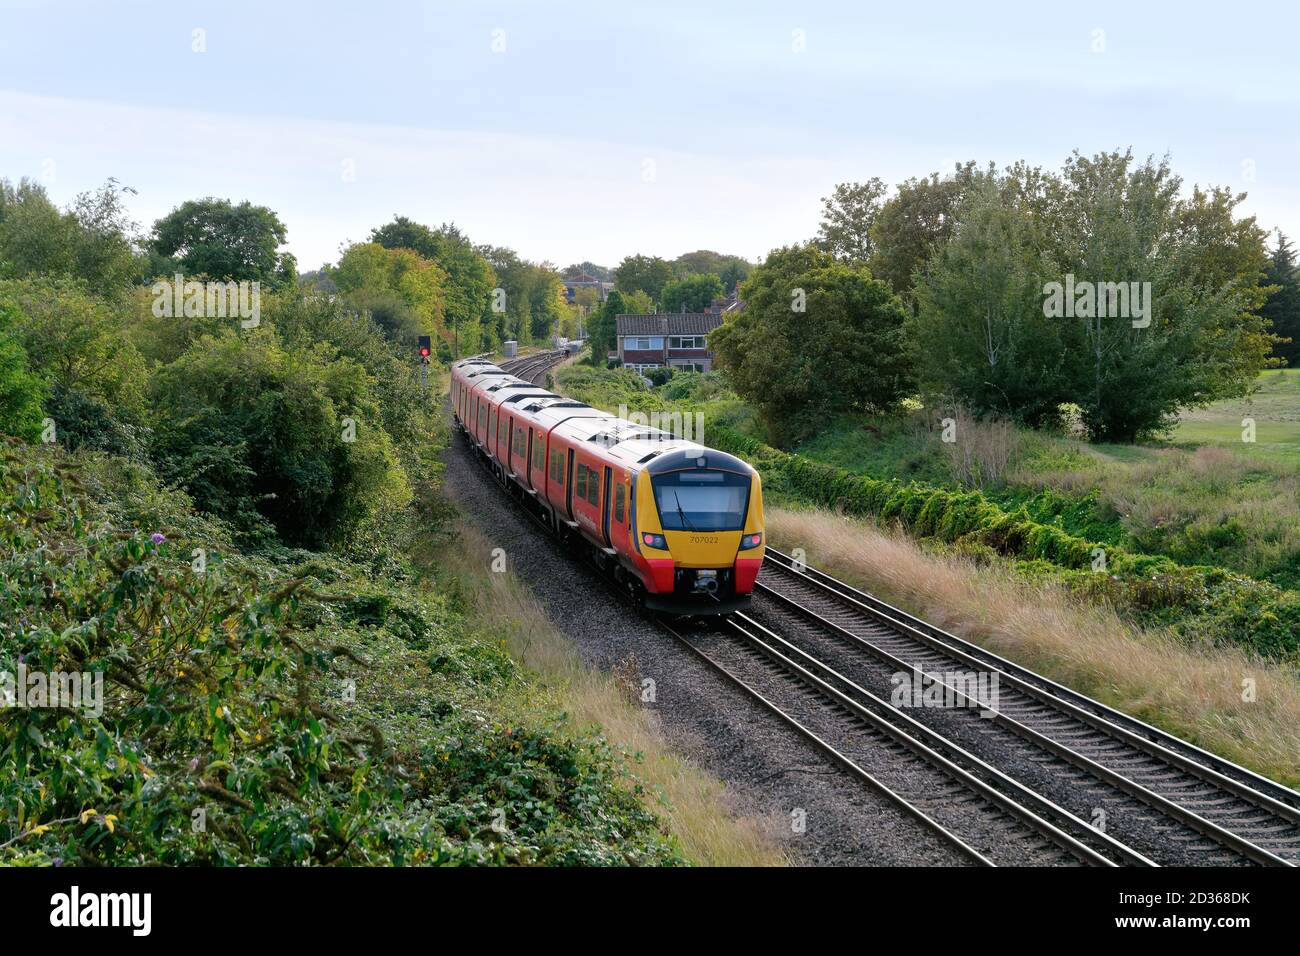 A South West Railway commuter train passing through a rural urban area of Surrey at Shepperton England UK Stock Photo